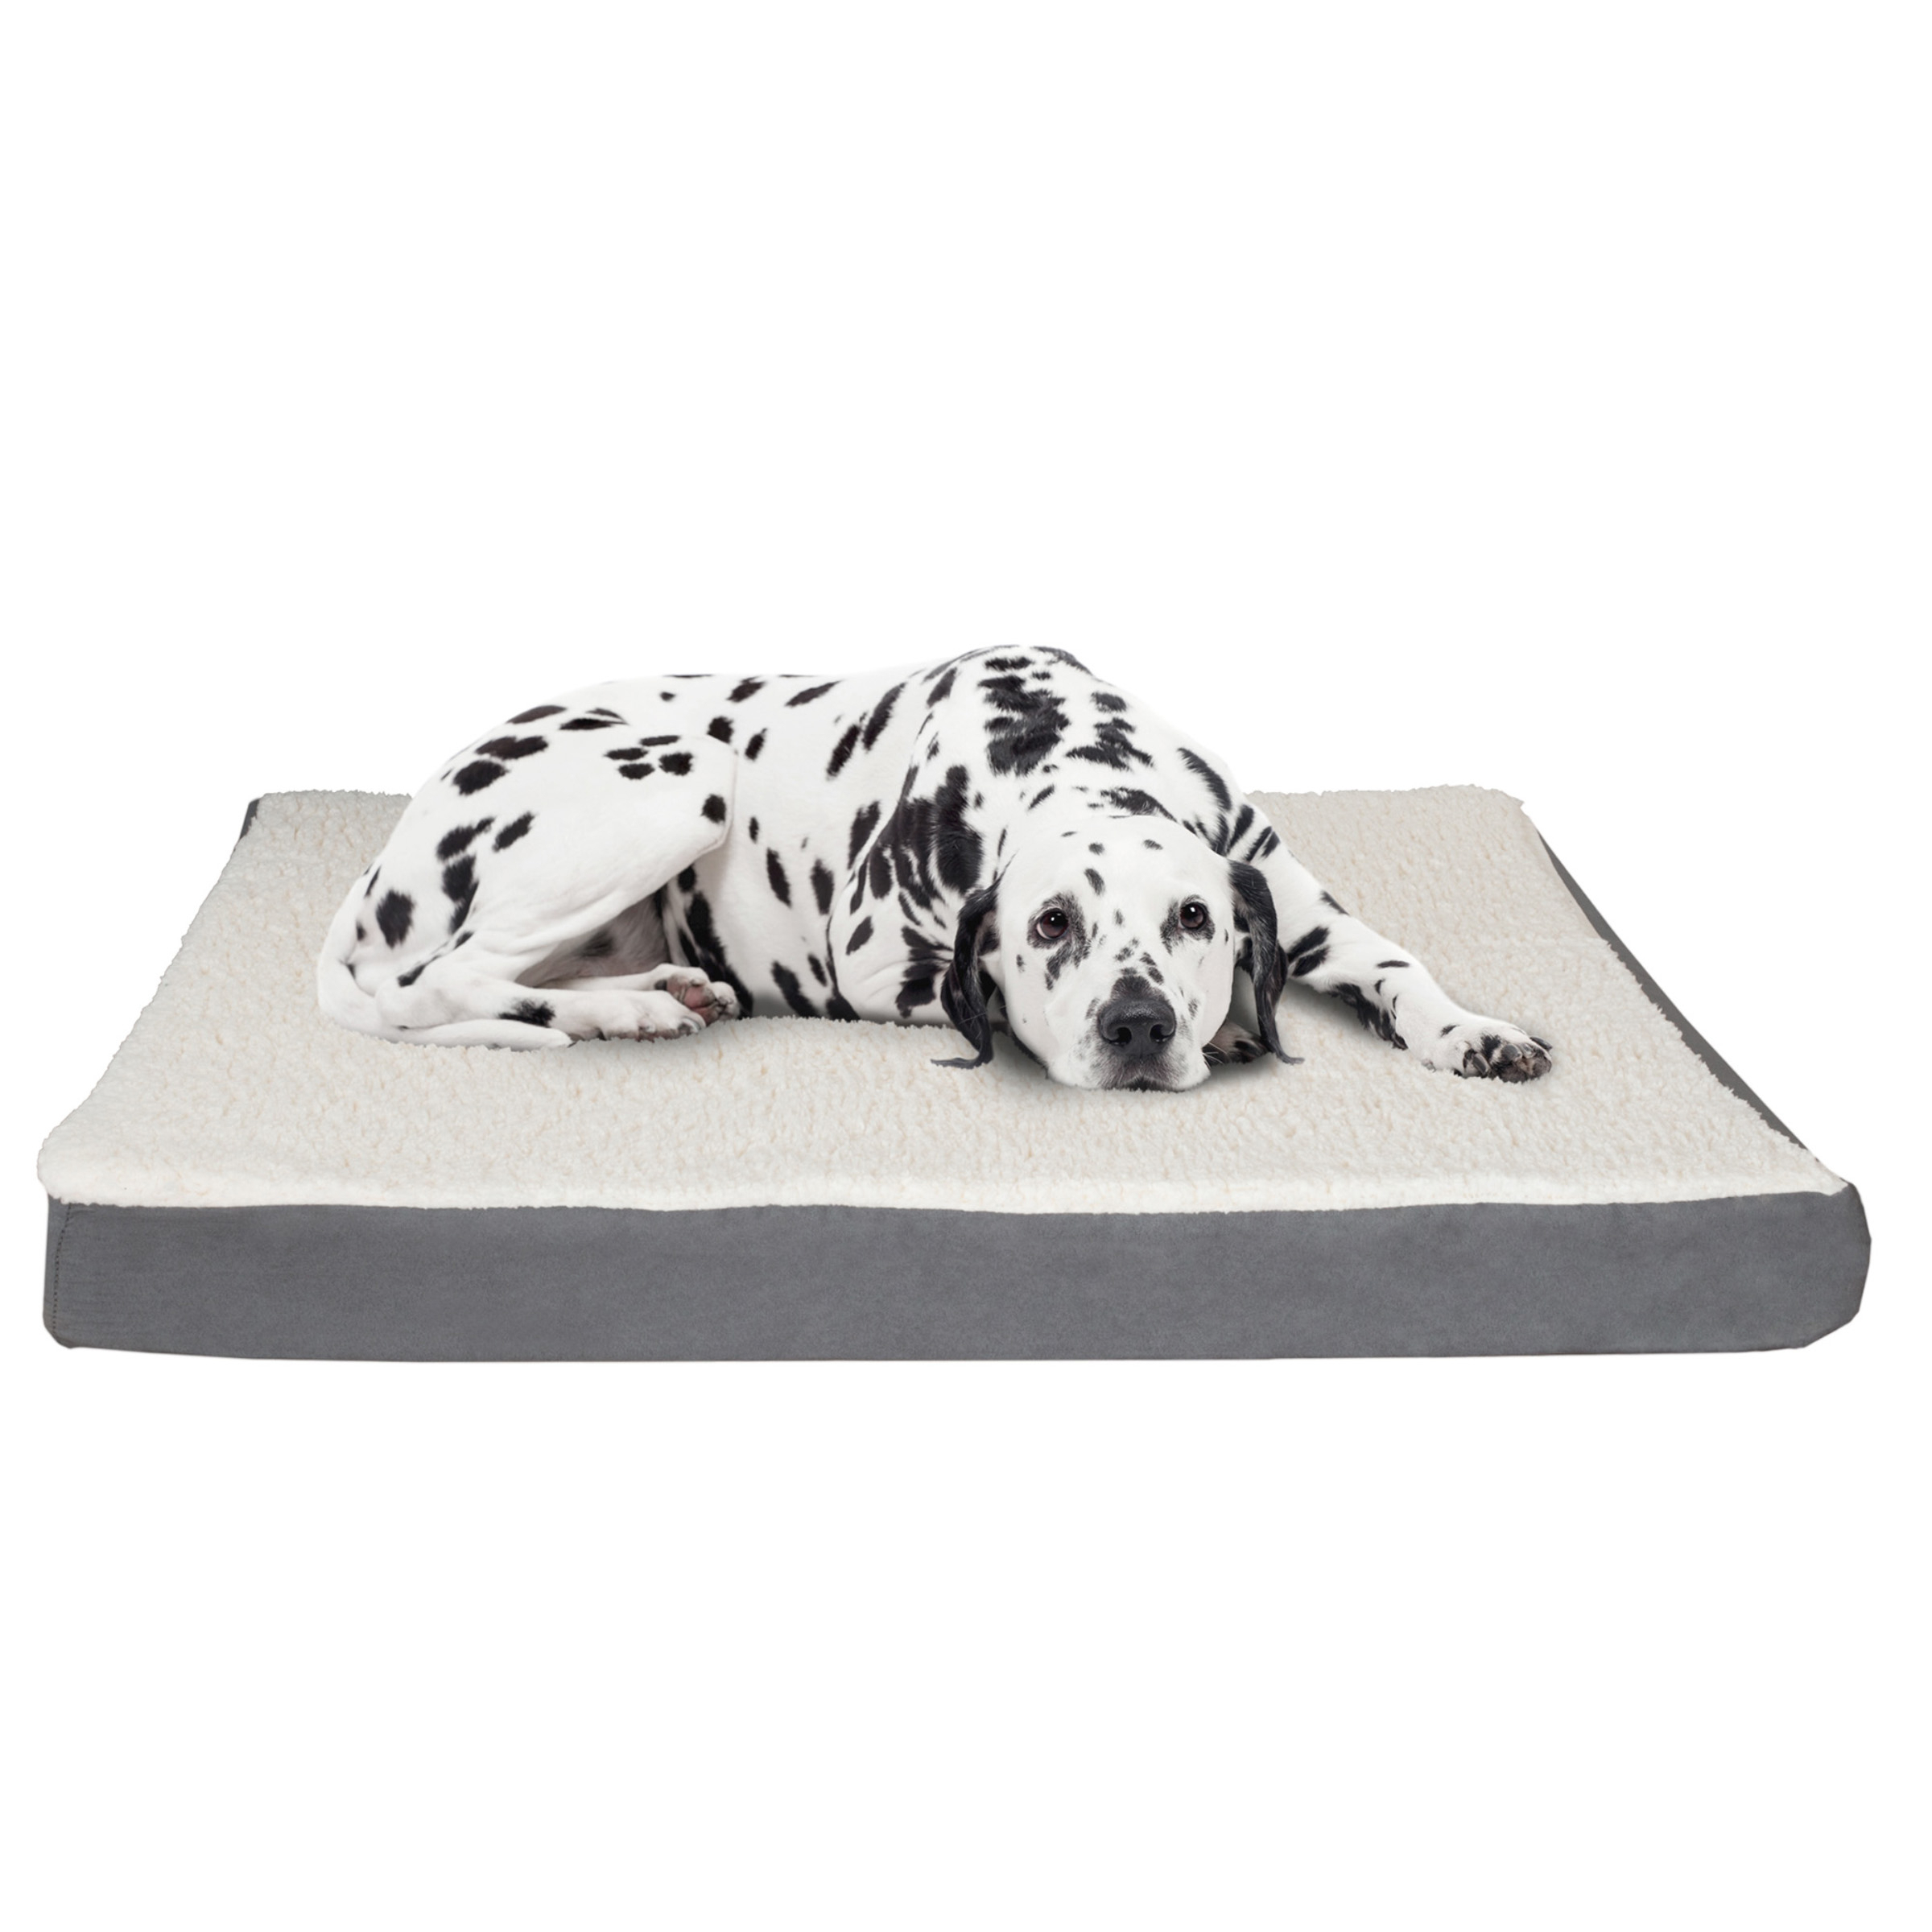 Orthopedic Dog Bed Memory Foam Cozy Sherpa 44 X 35 X 4 Washable Cover XL - Gray